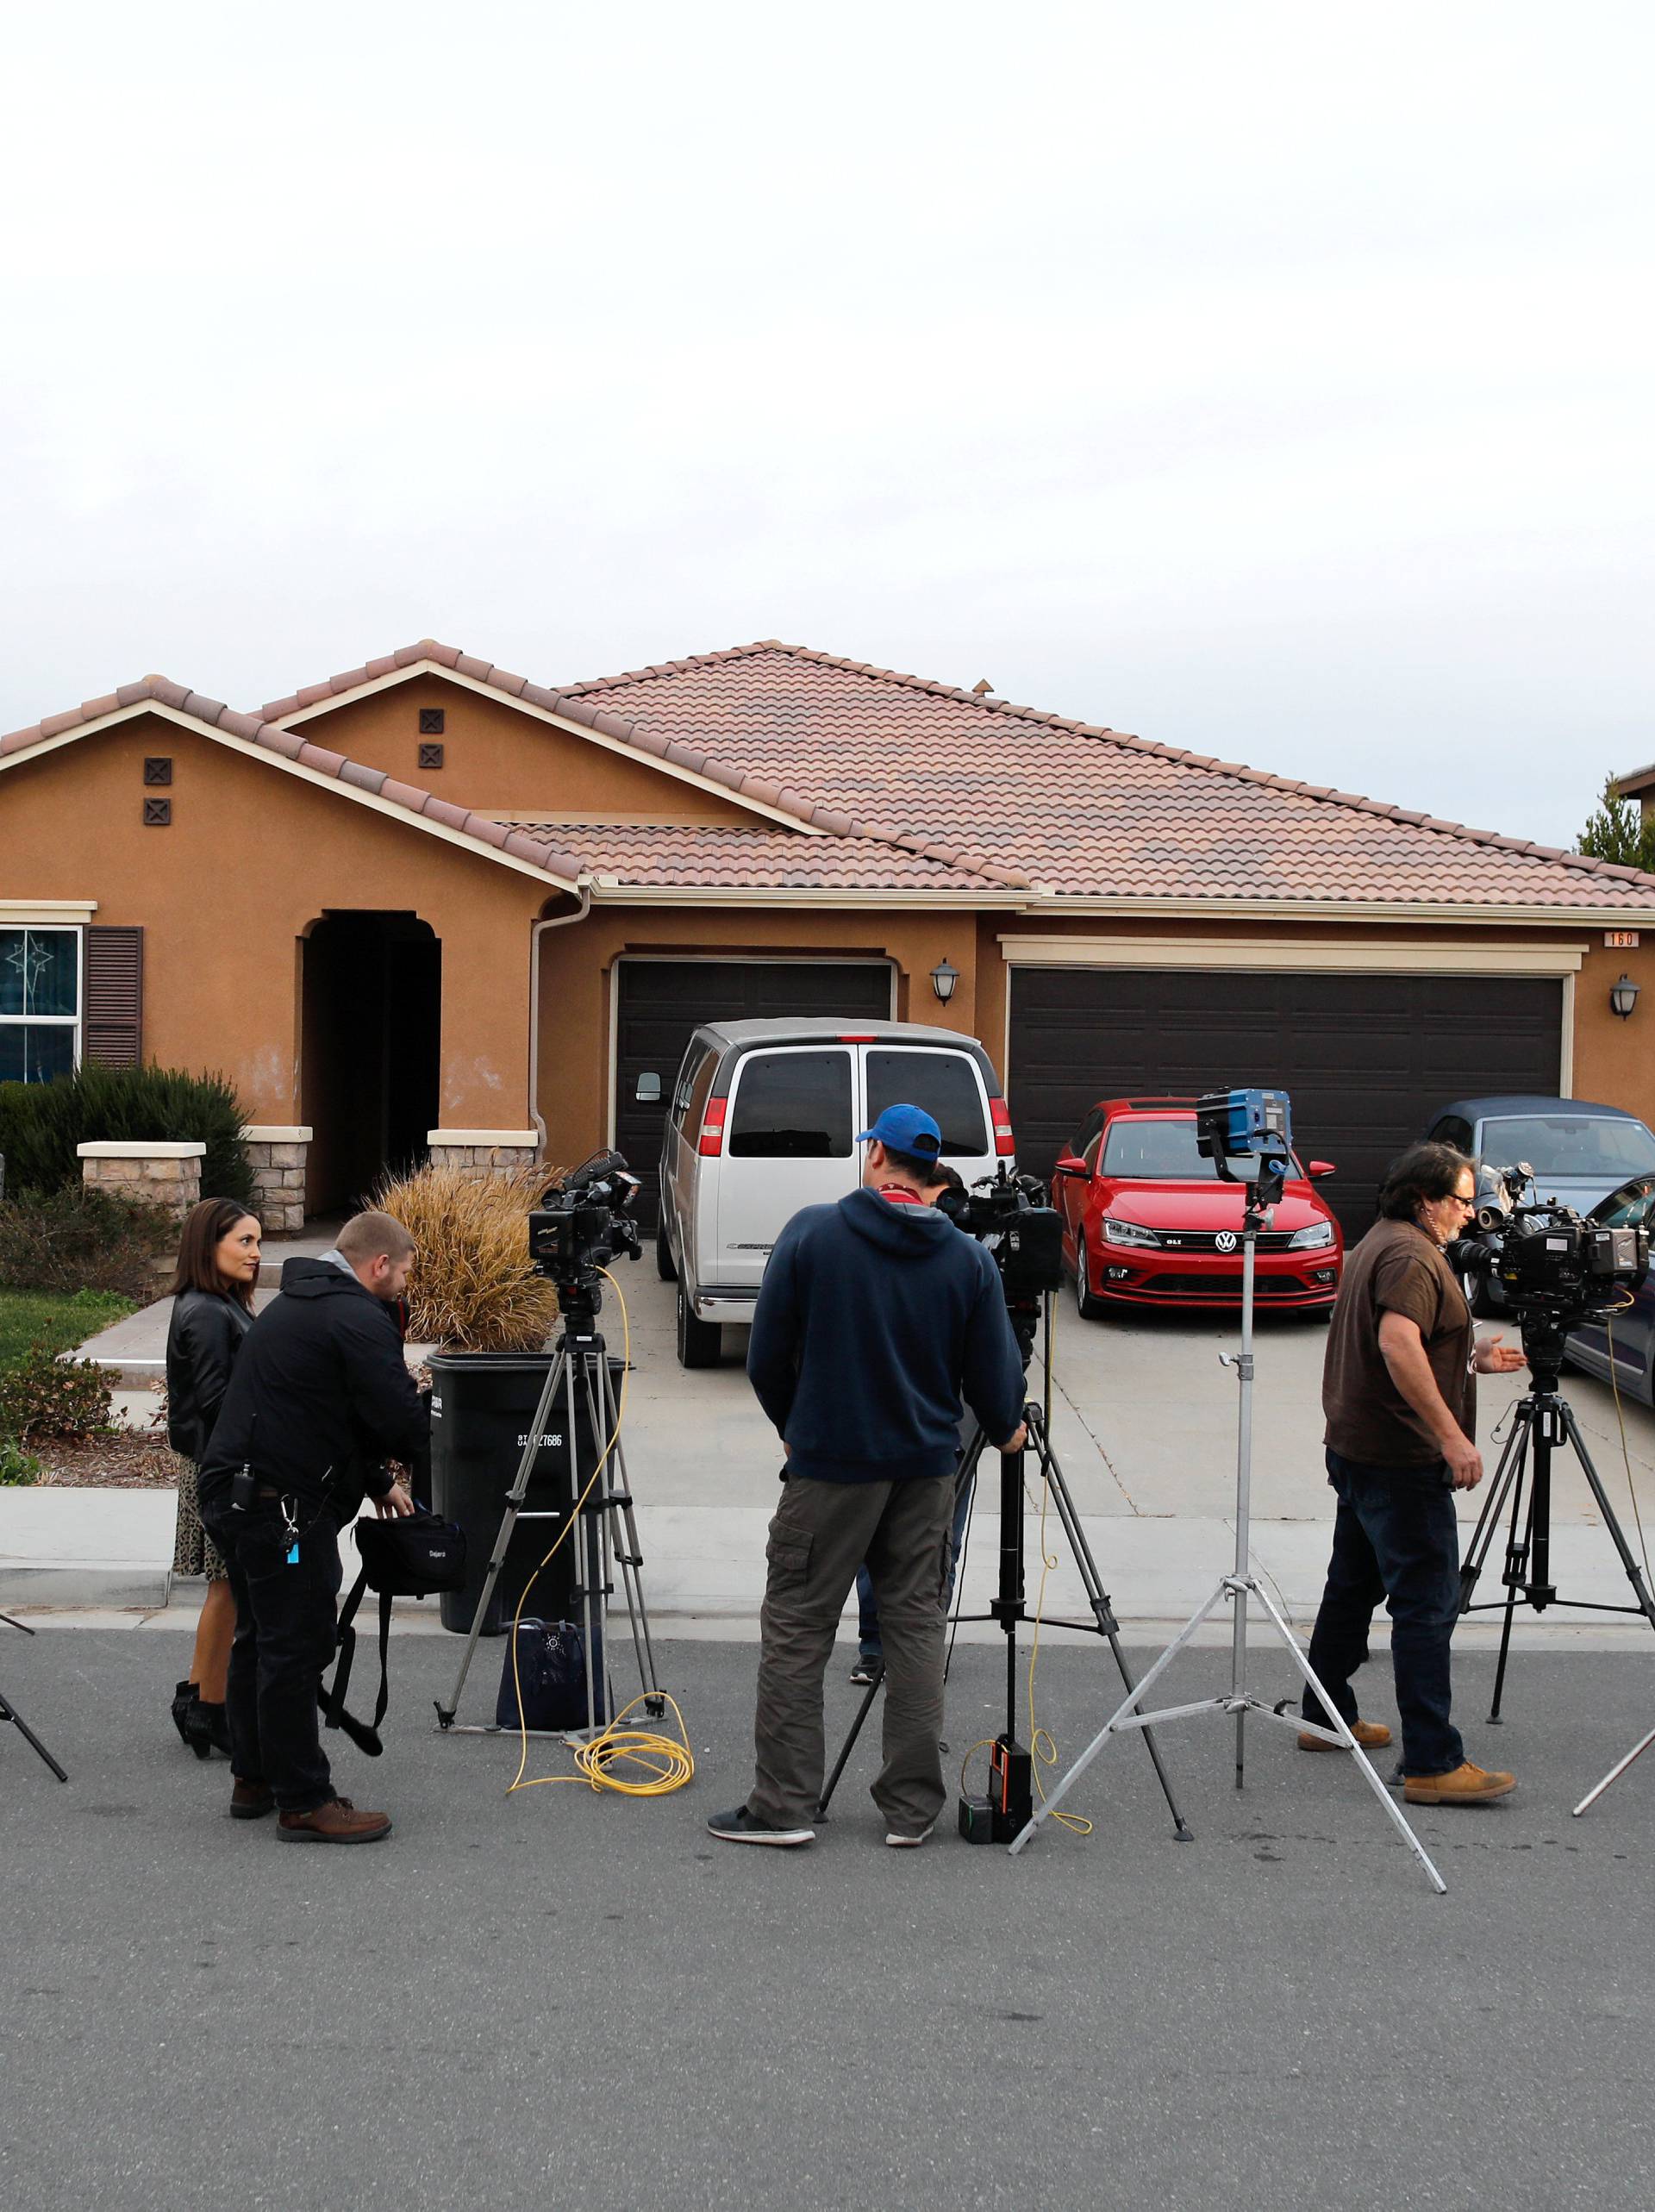 Members of the news media stand outside the home of the Turpins in Perris